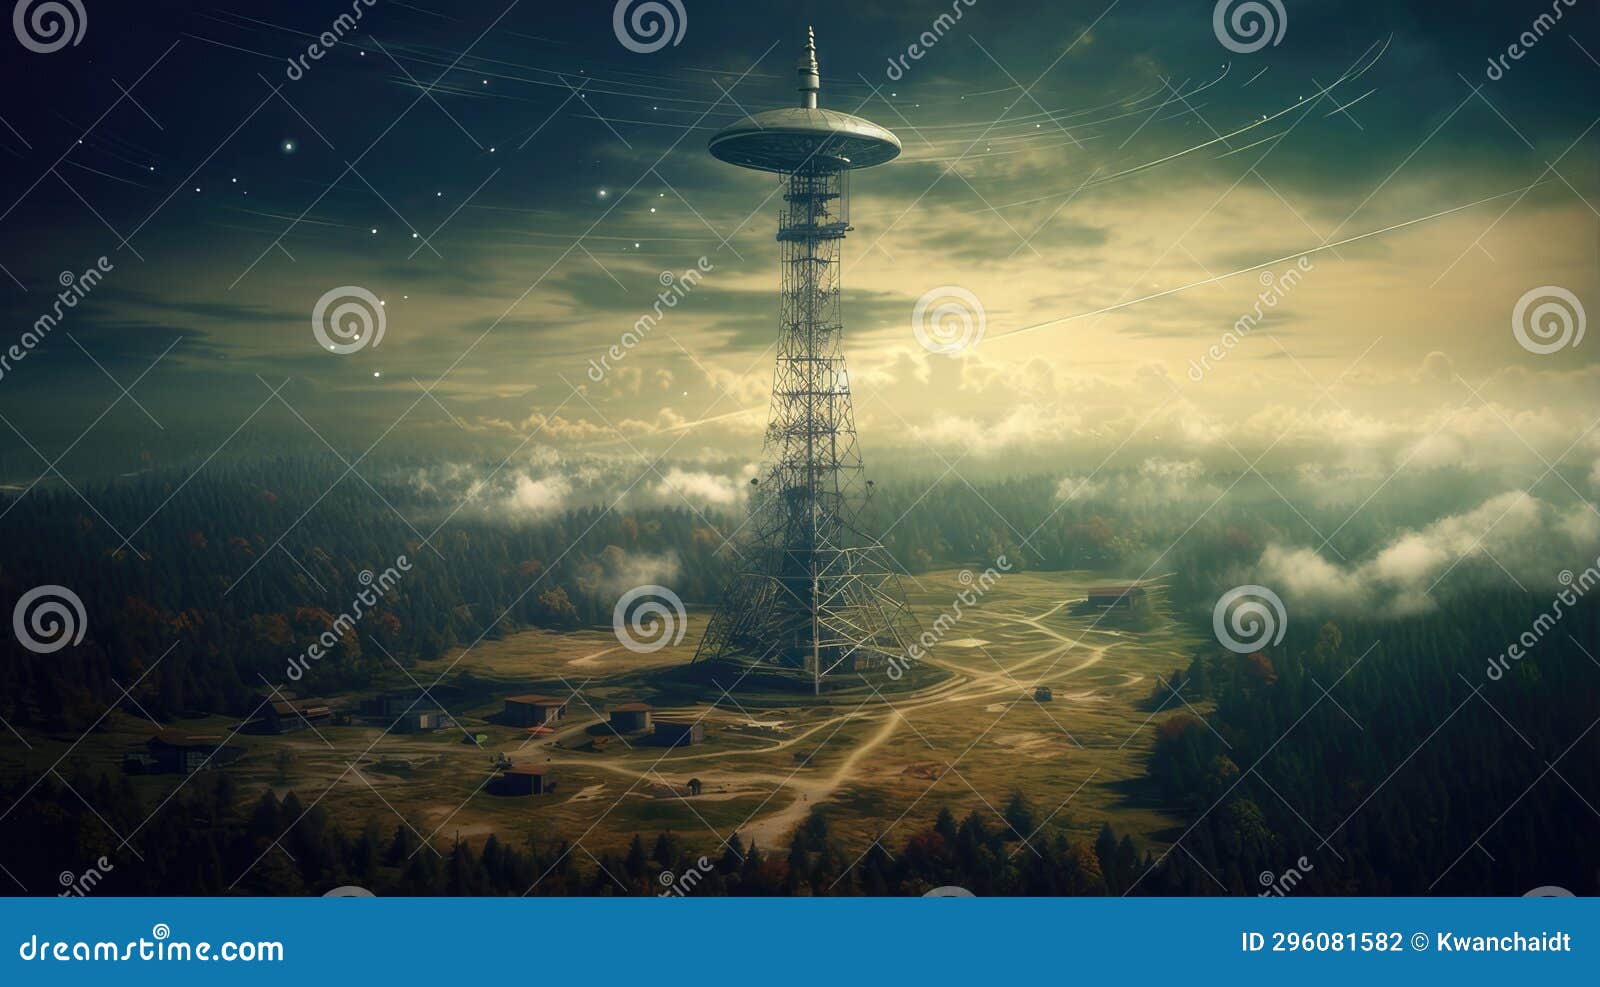 a radio tower emitting signals across the airwaves, izing the transmission of information over long distances